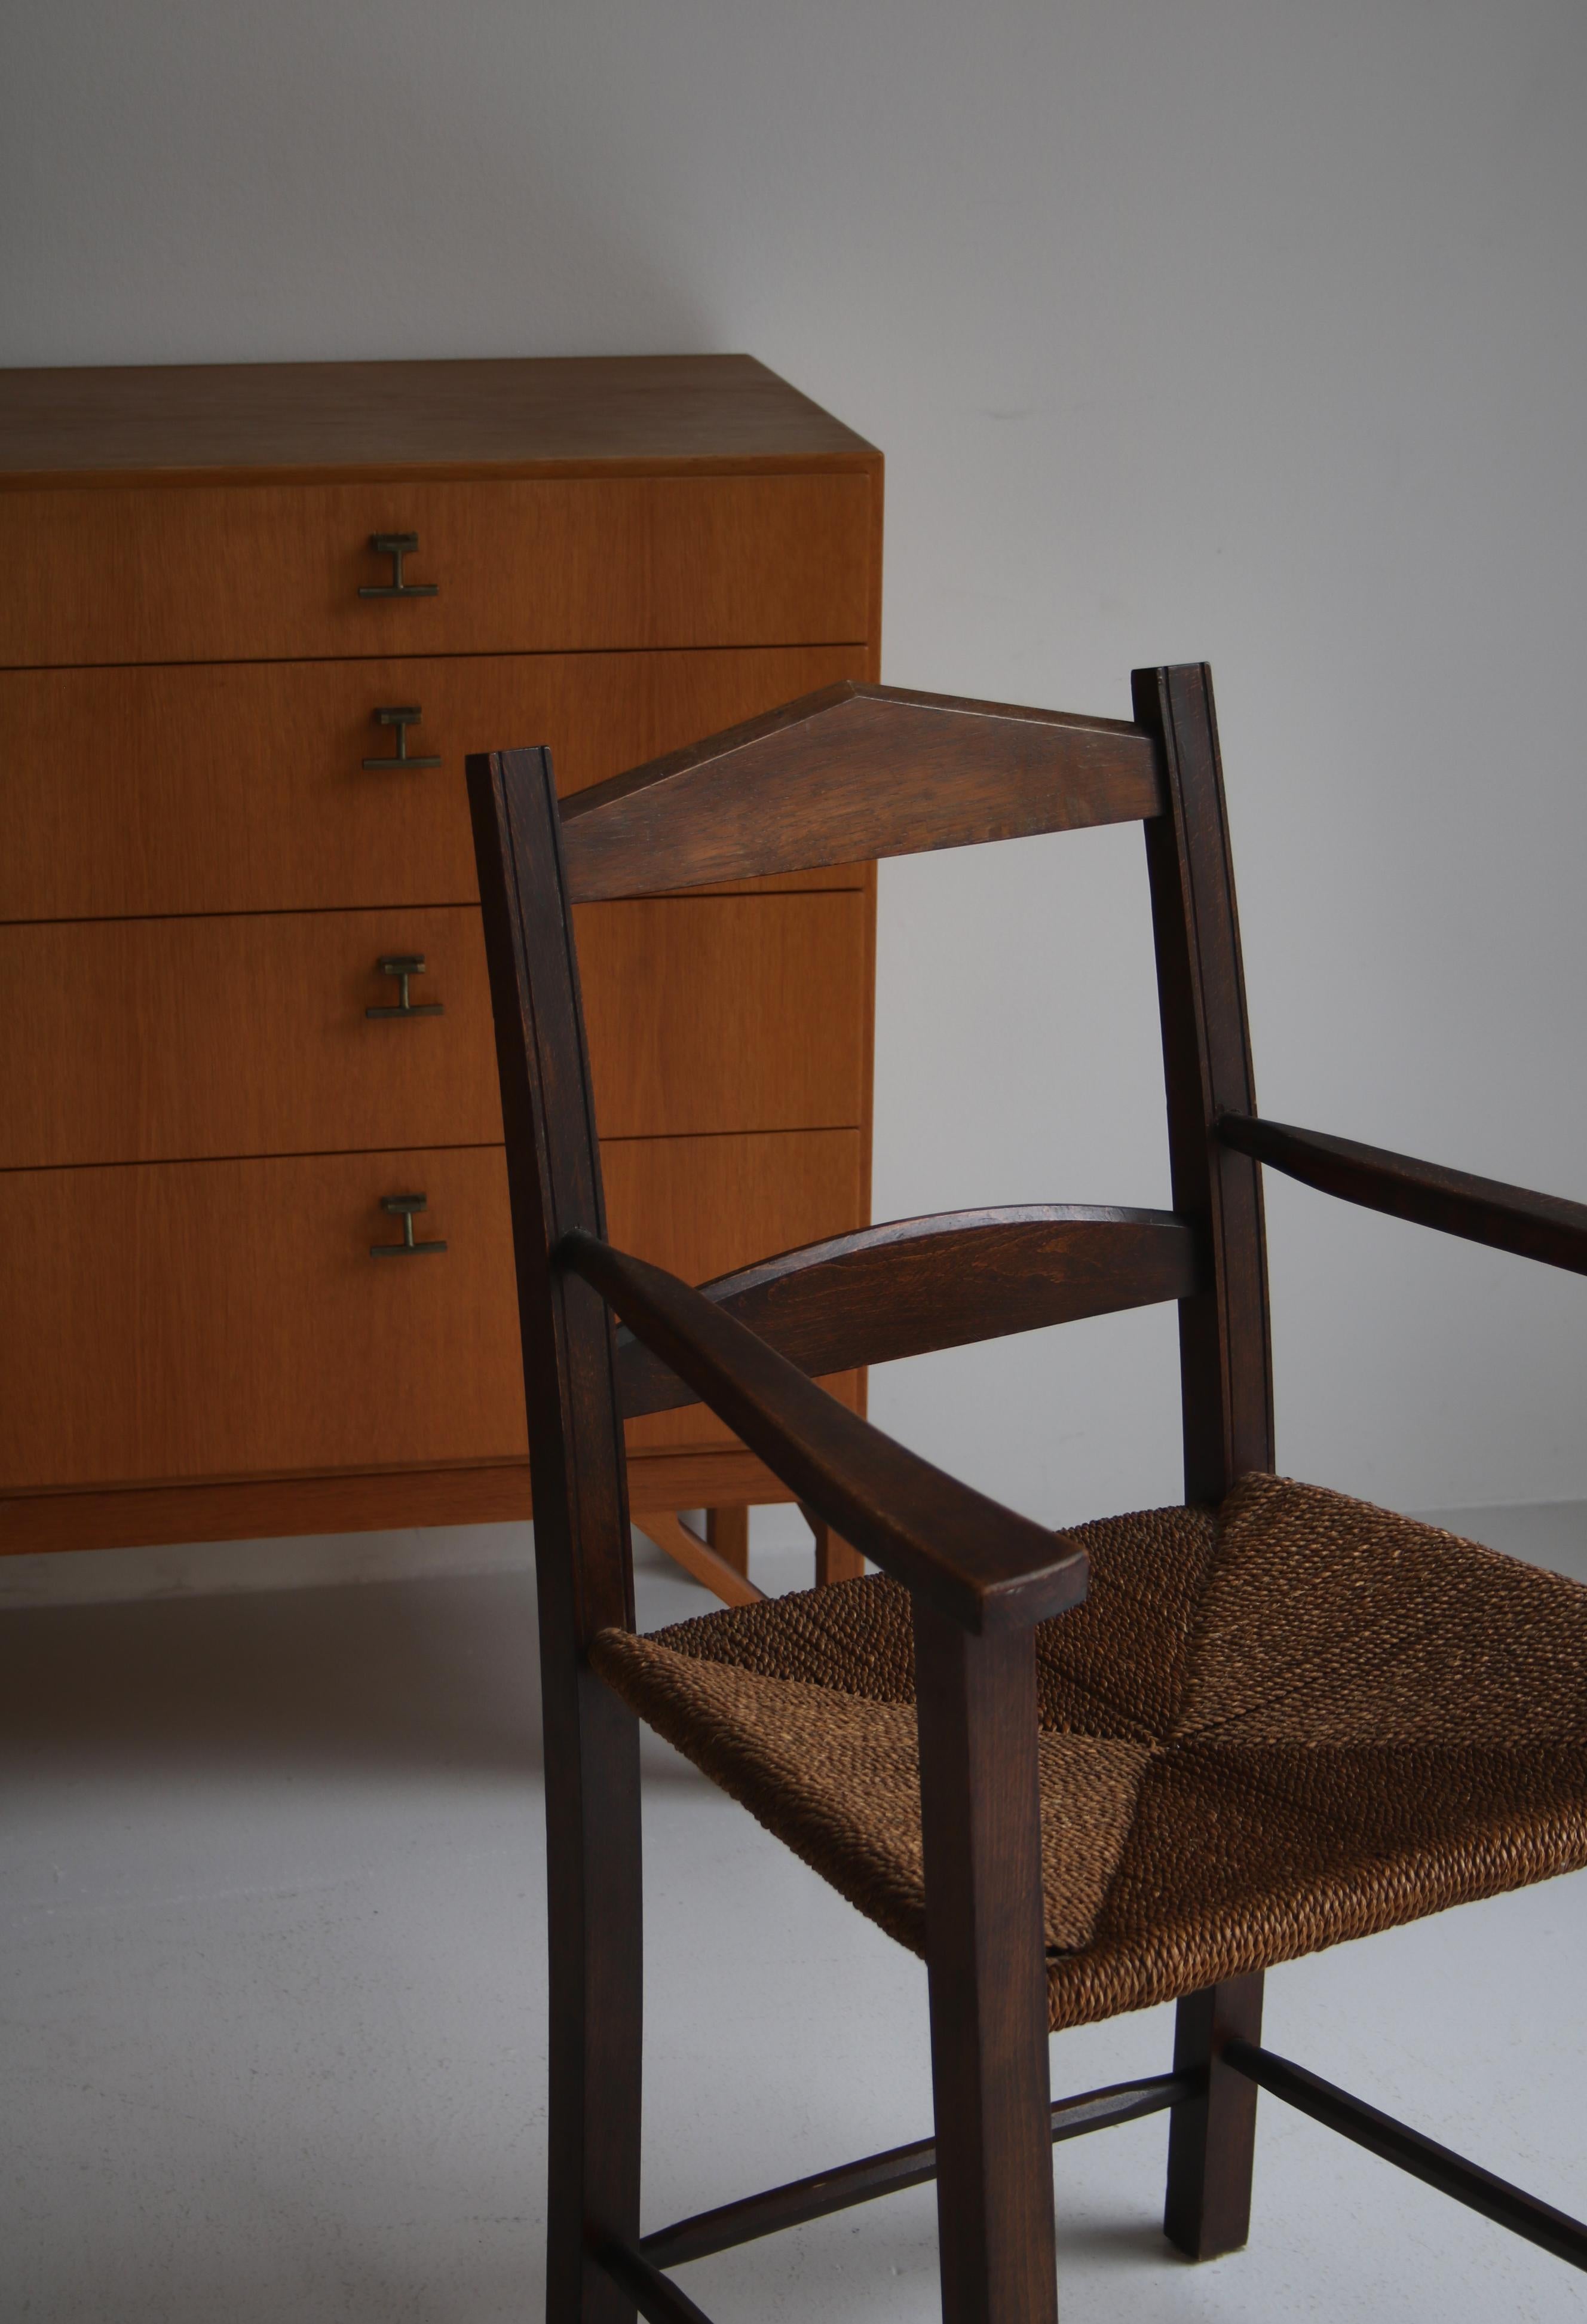 Pair of Armchairs in Dark Stained Pine and Seagrass Danish Cabinetmaker, 1940s For Sale 7